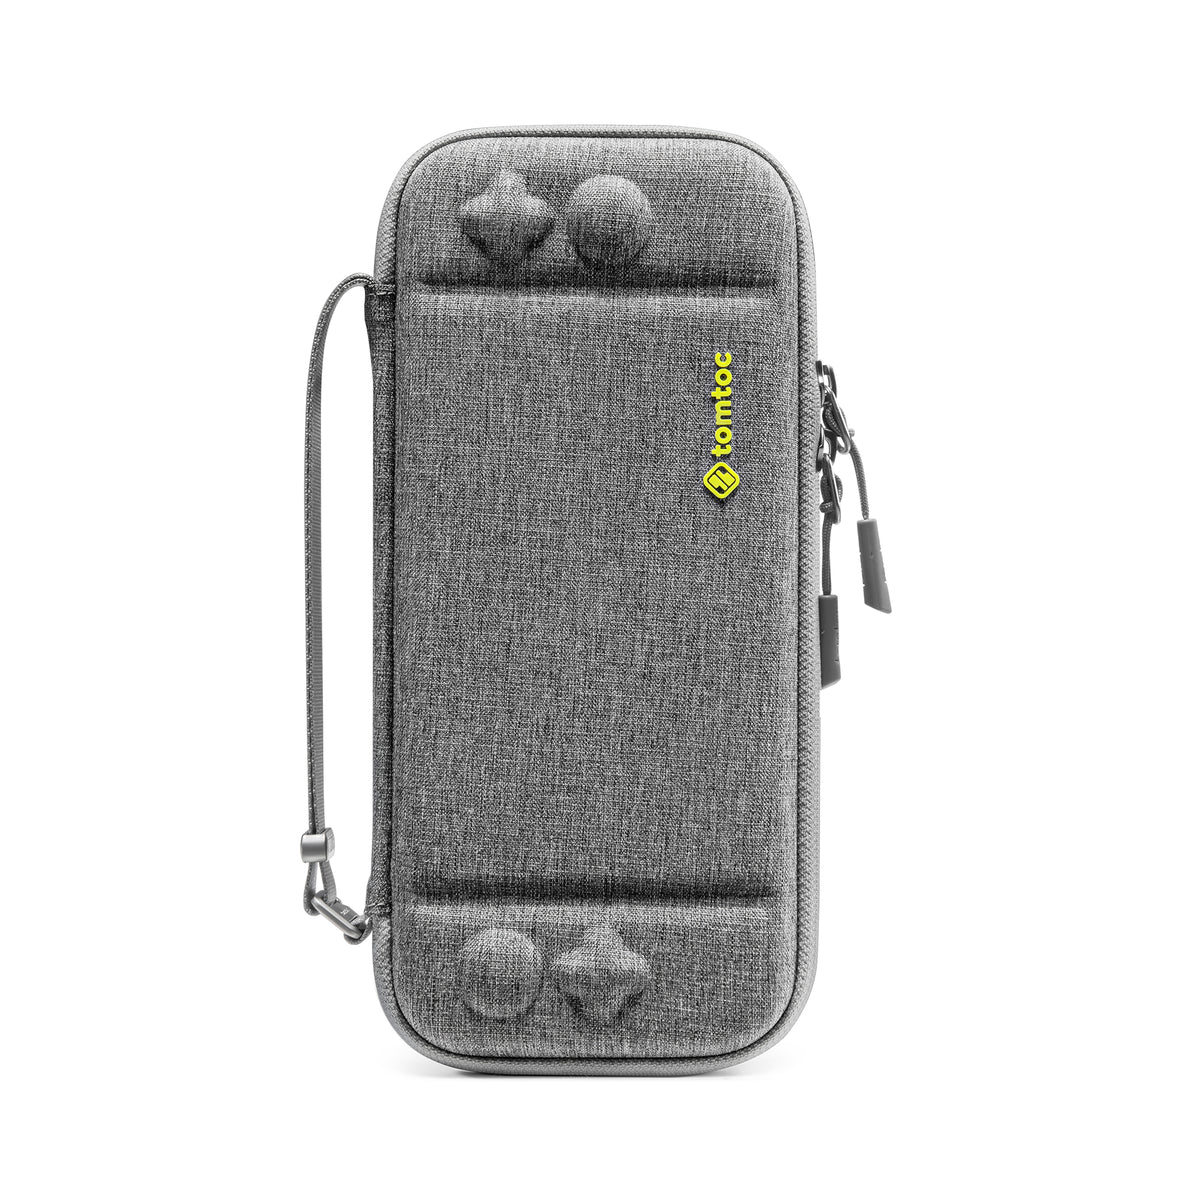 tomtoc Slim Protective Carrying Case with 10 Game Cartridges - Nintendo Switch & OLED Model - Gray